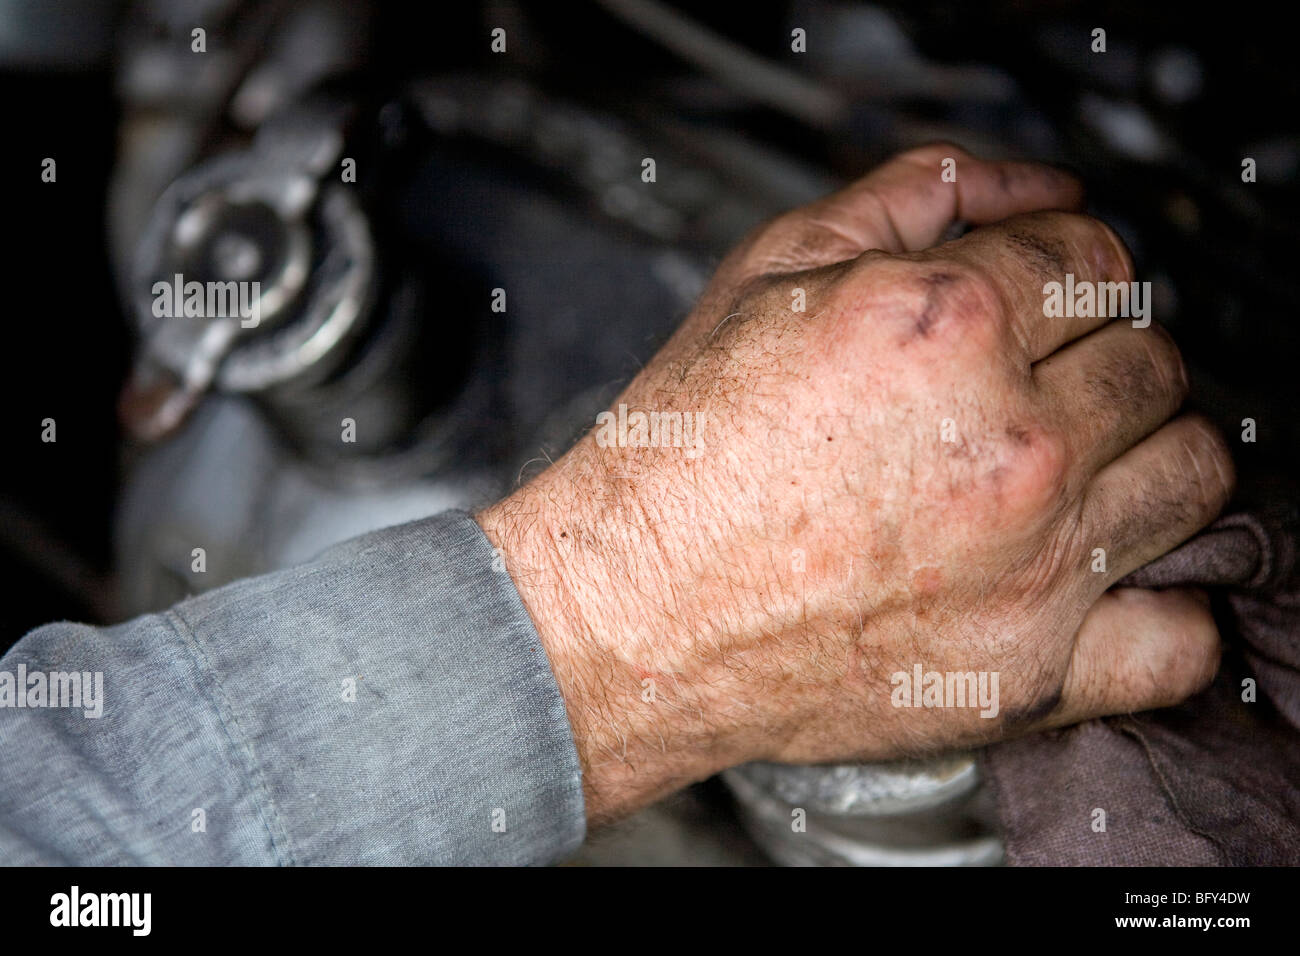 Mechanic's hand working on a diesel engine Stock Photo